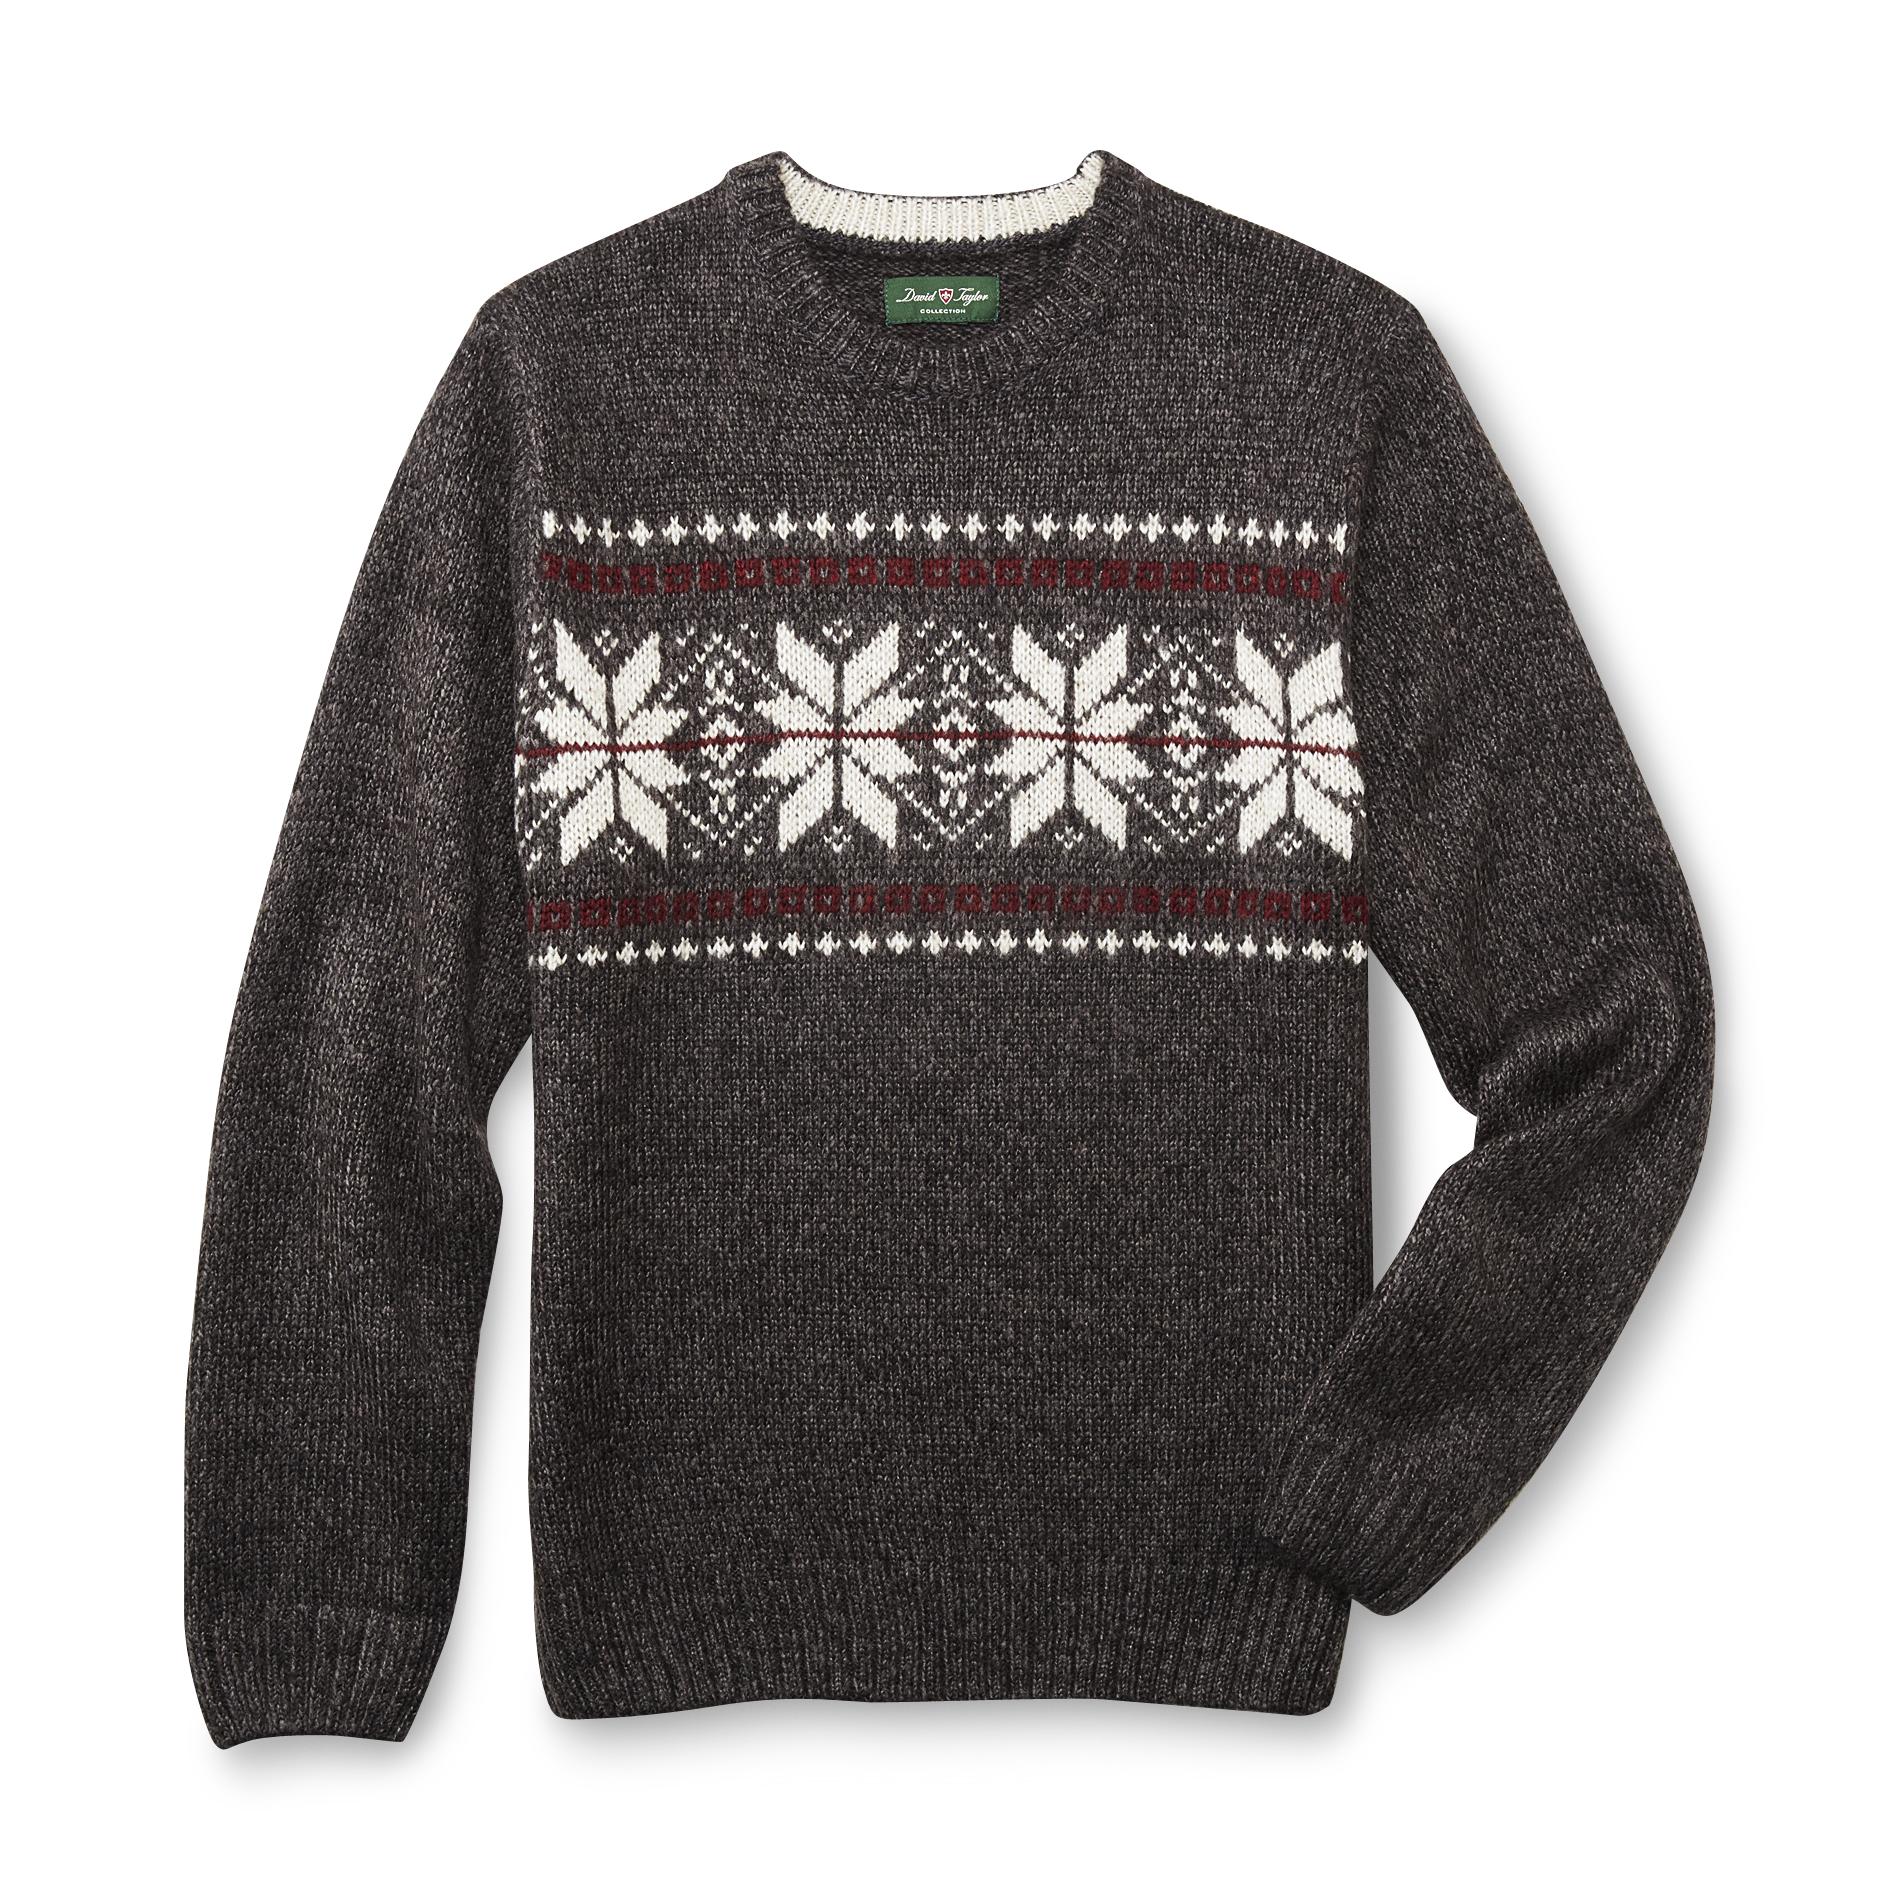 David Taylor Collection Men's Sweater - Snowflake